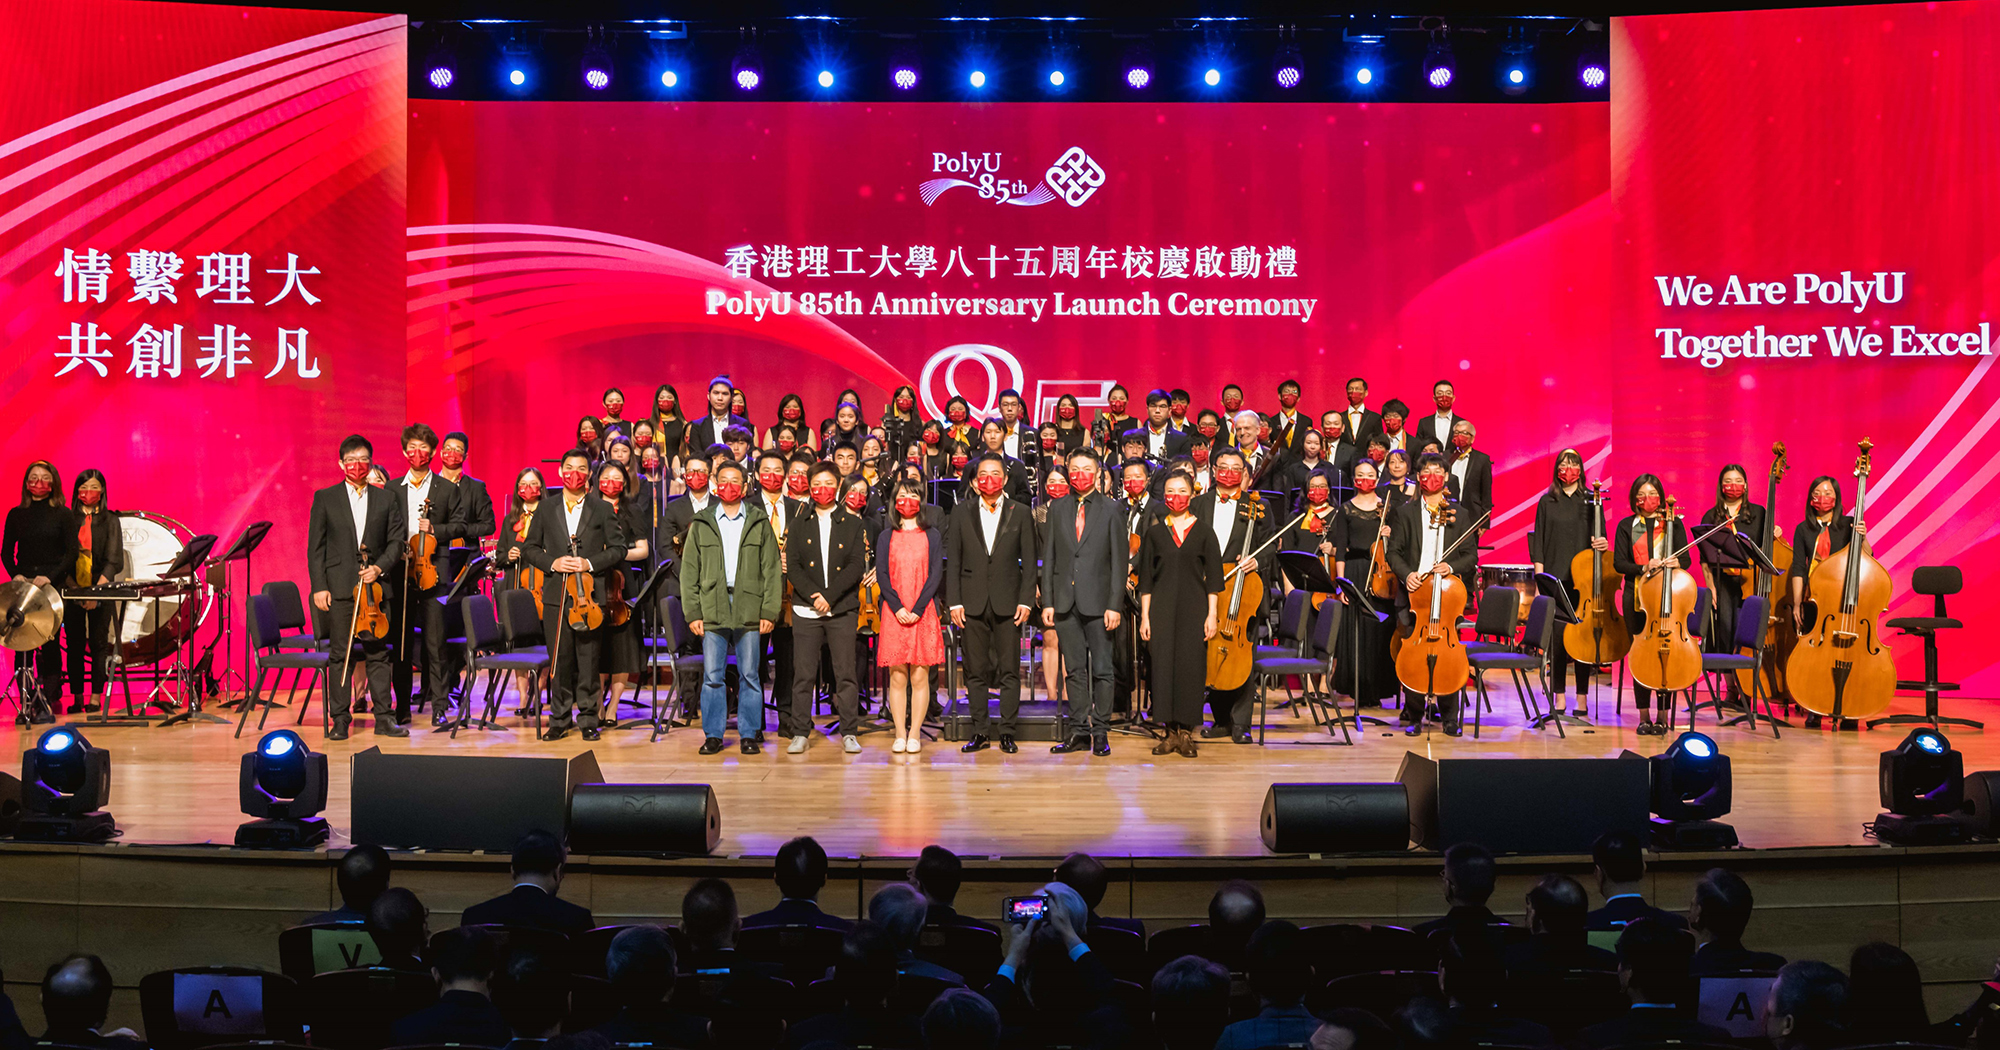 PolyU’s Orchestra and Choir performed the 85th Anniversary theme song at the Jockey Club Auditorium.